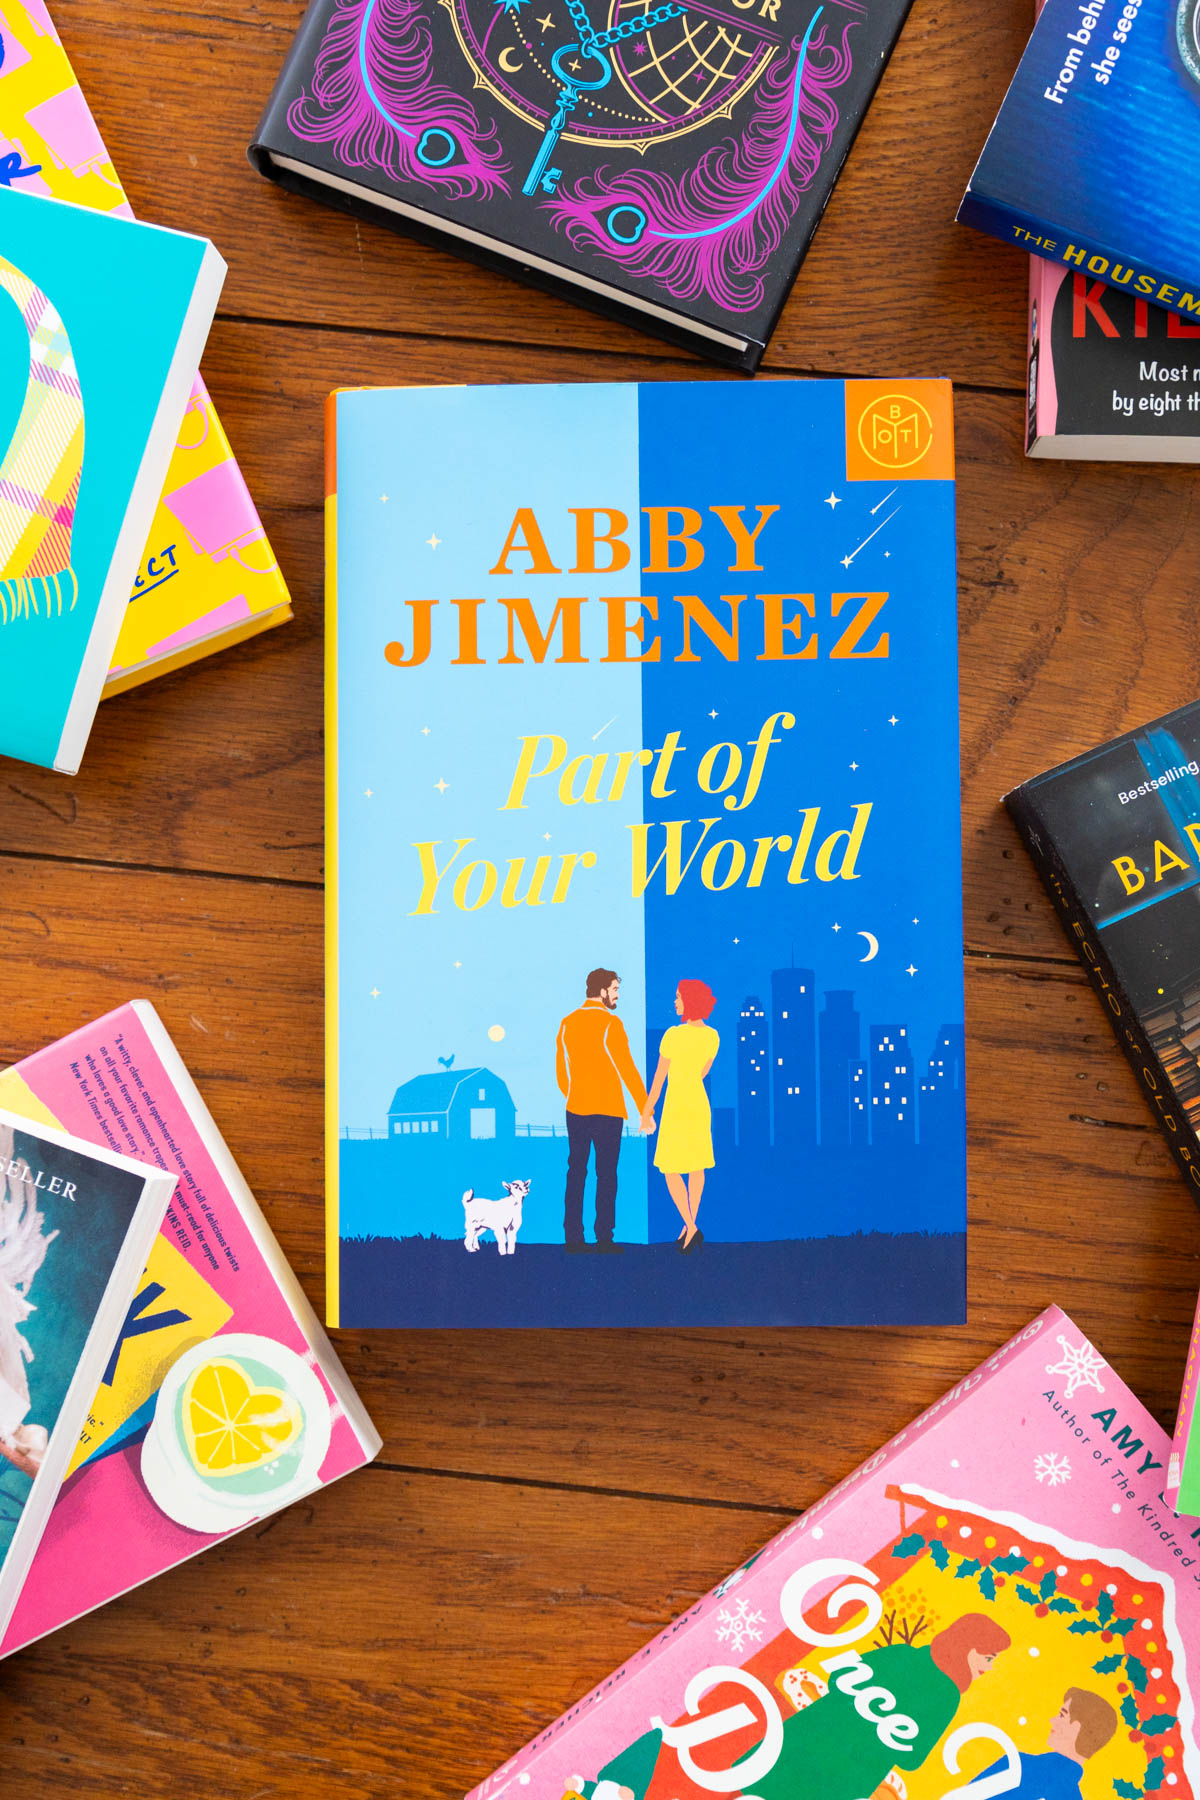 A copy of Part of Your World by Abby Jimenez is on the table.